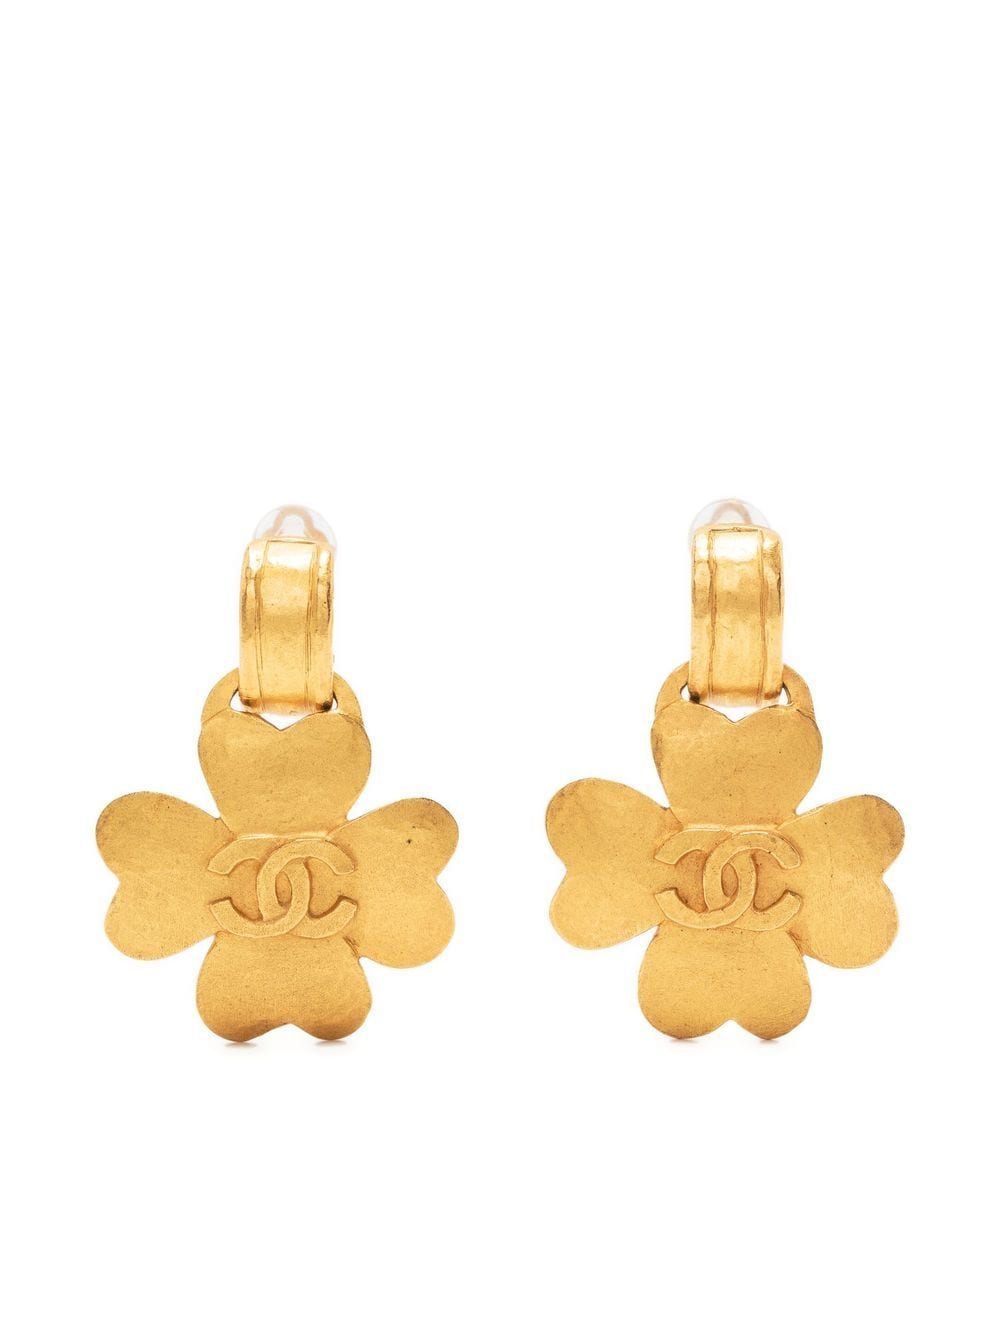 CHANEL Pre-Owned 1995 CC clover-motif clip-on earrings - Gold